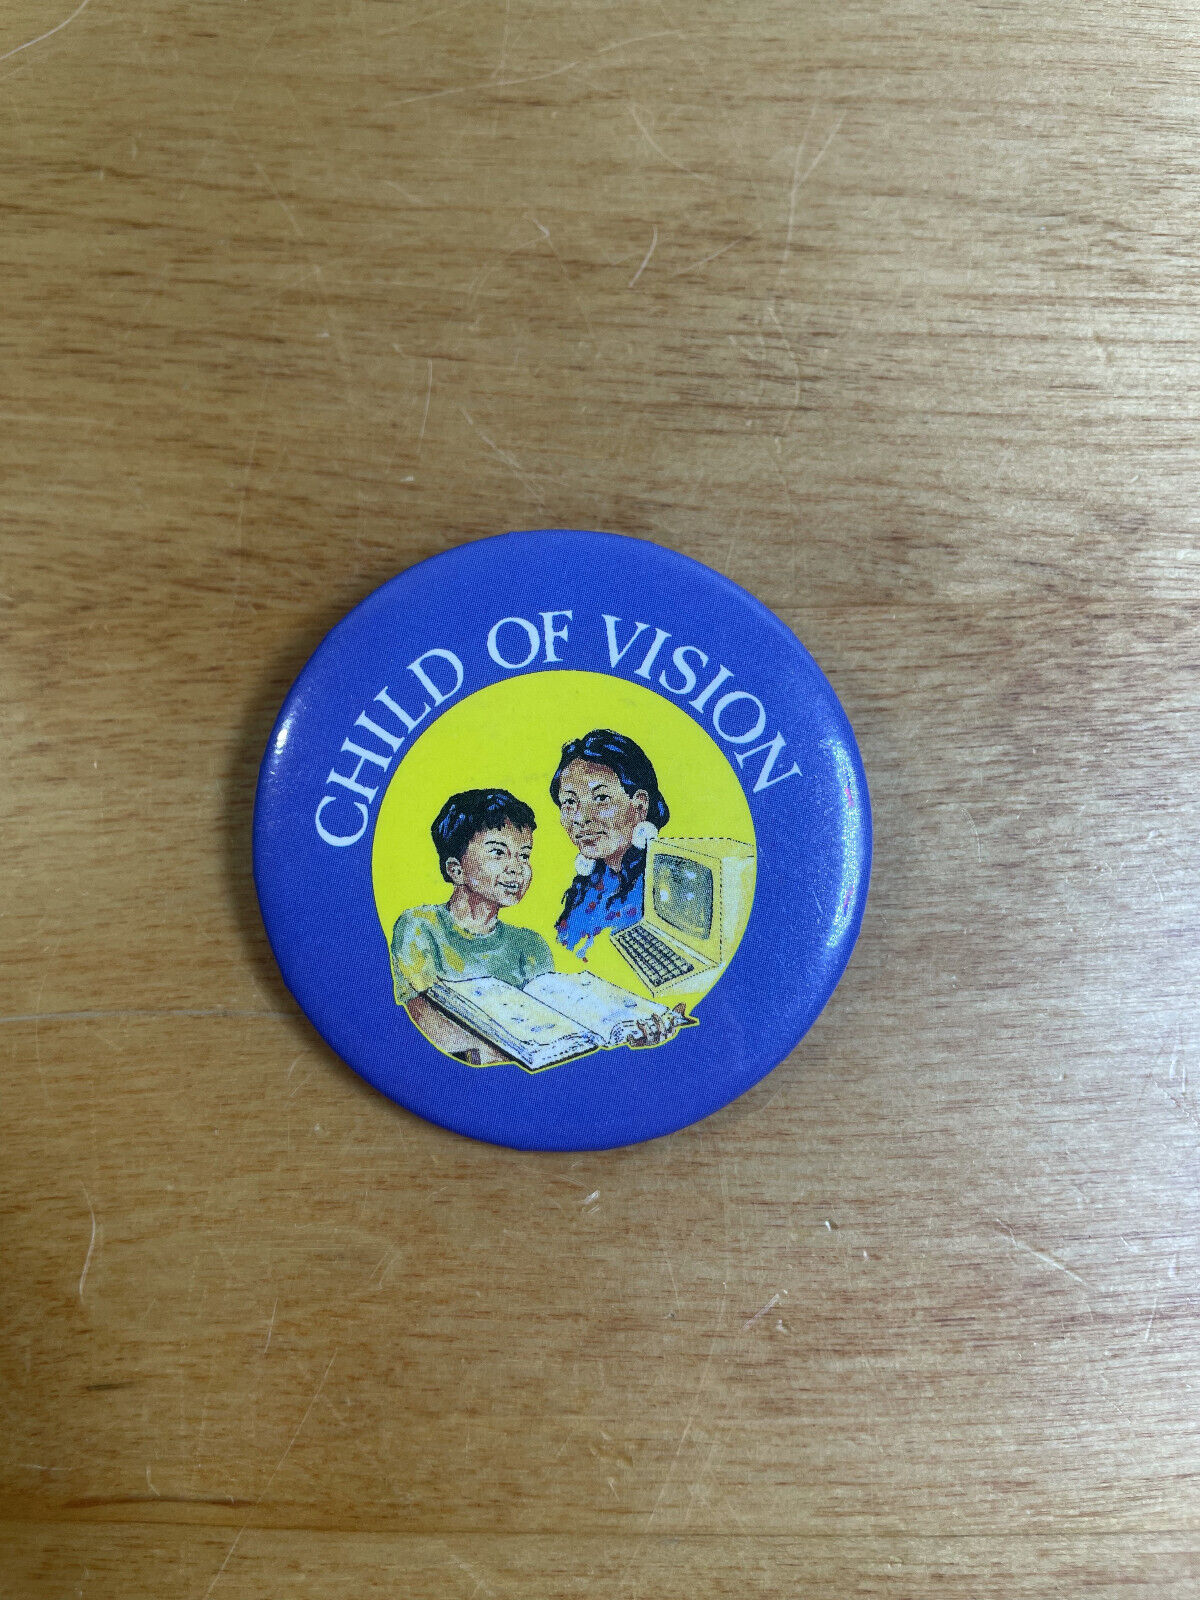 Child Of Vision Computer Learning Image Blue Vintage Metal Pinback Pin Button